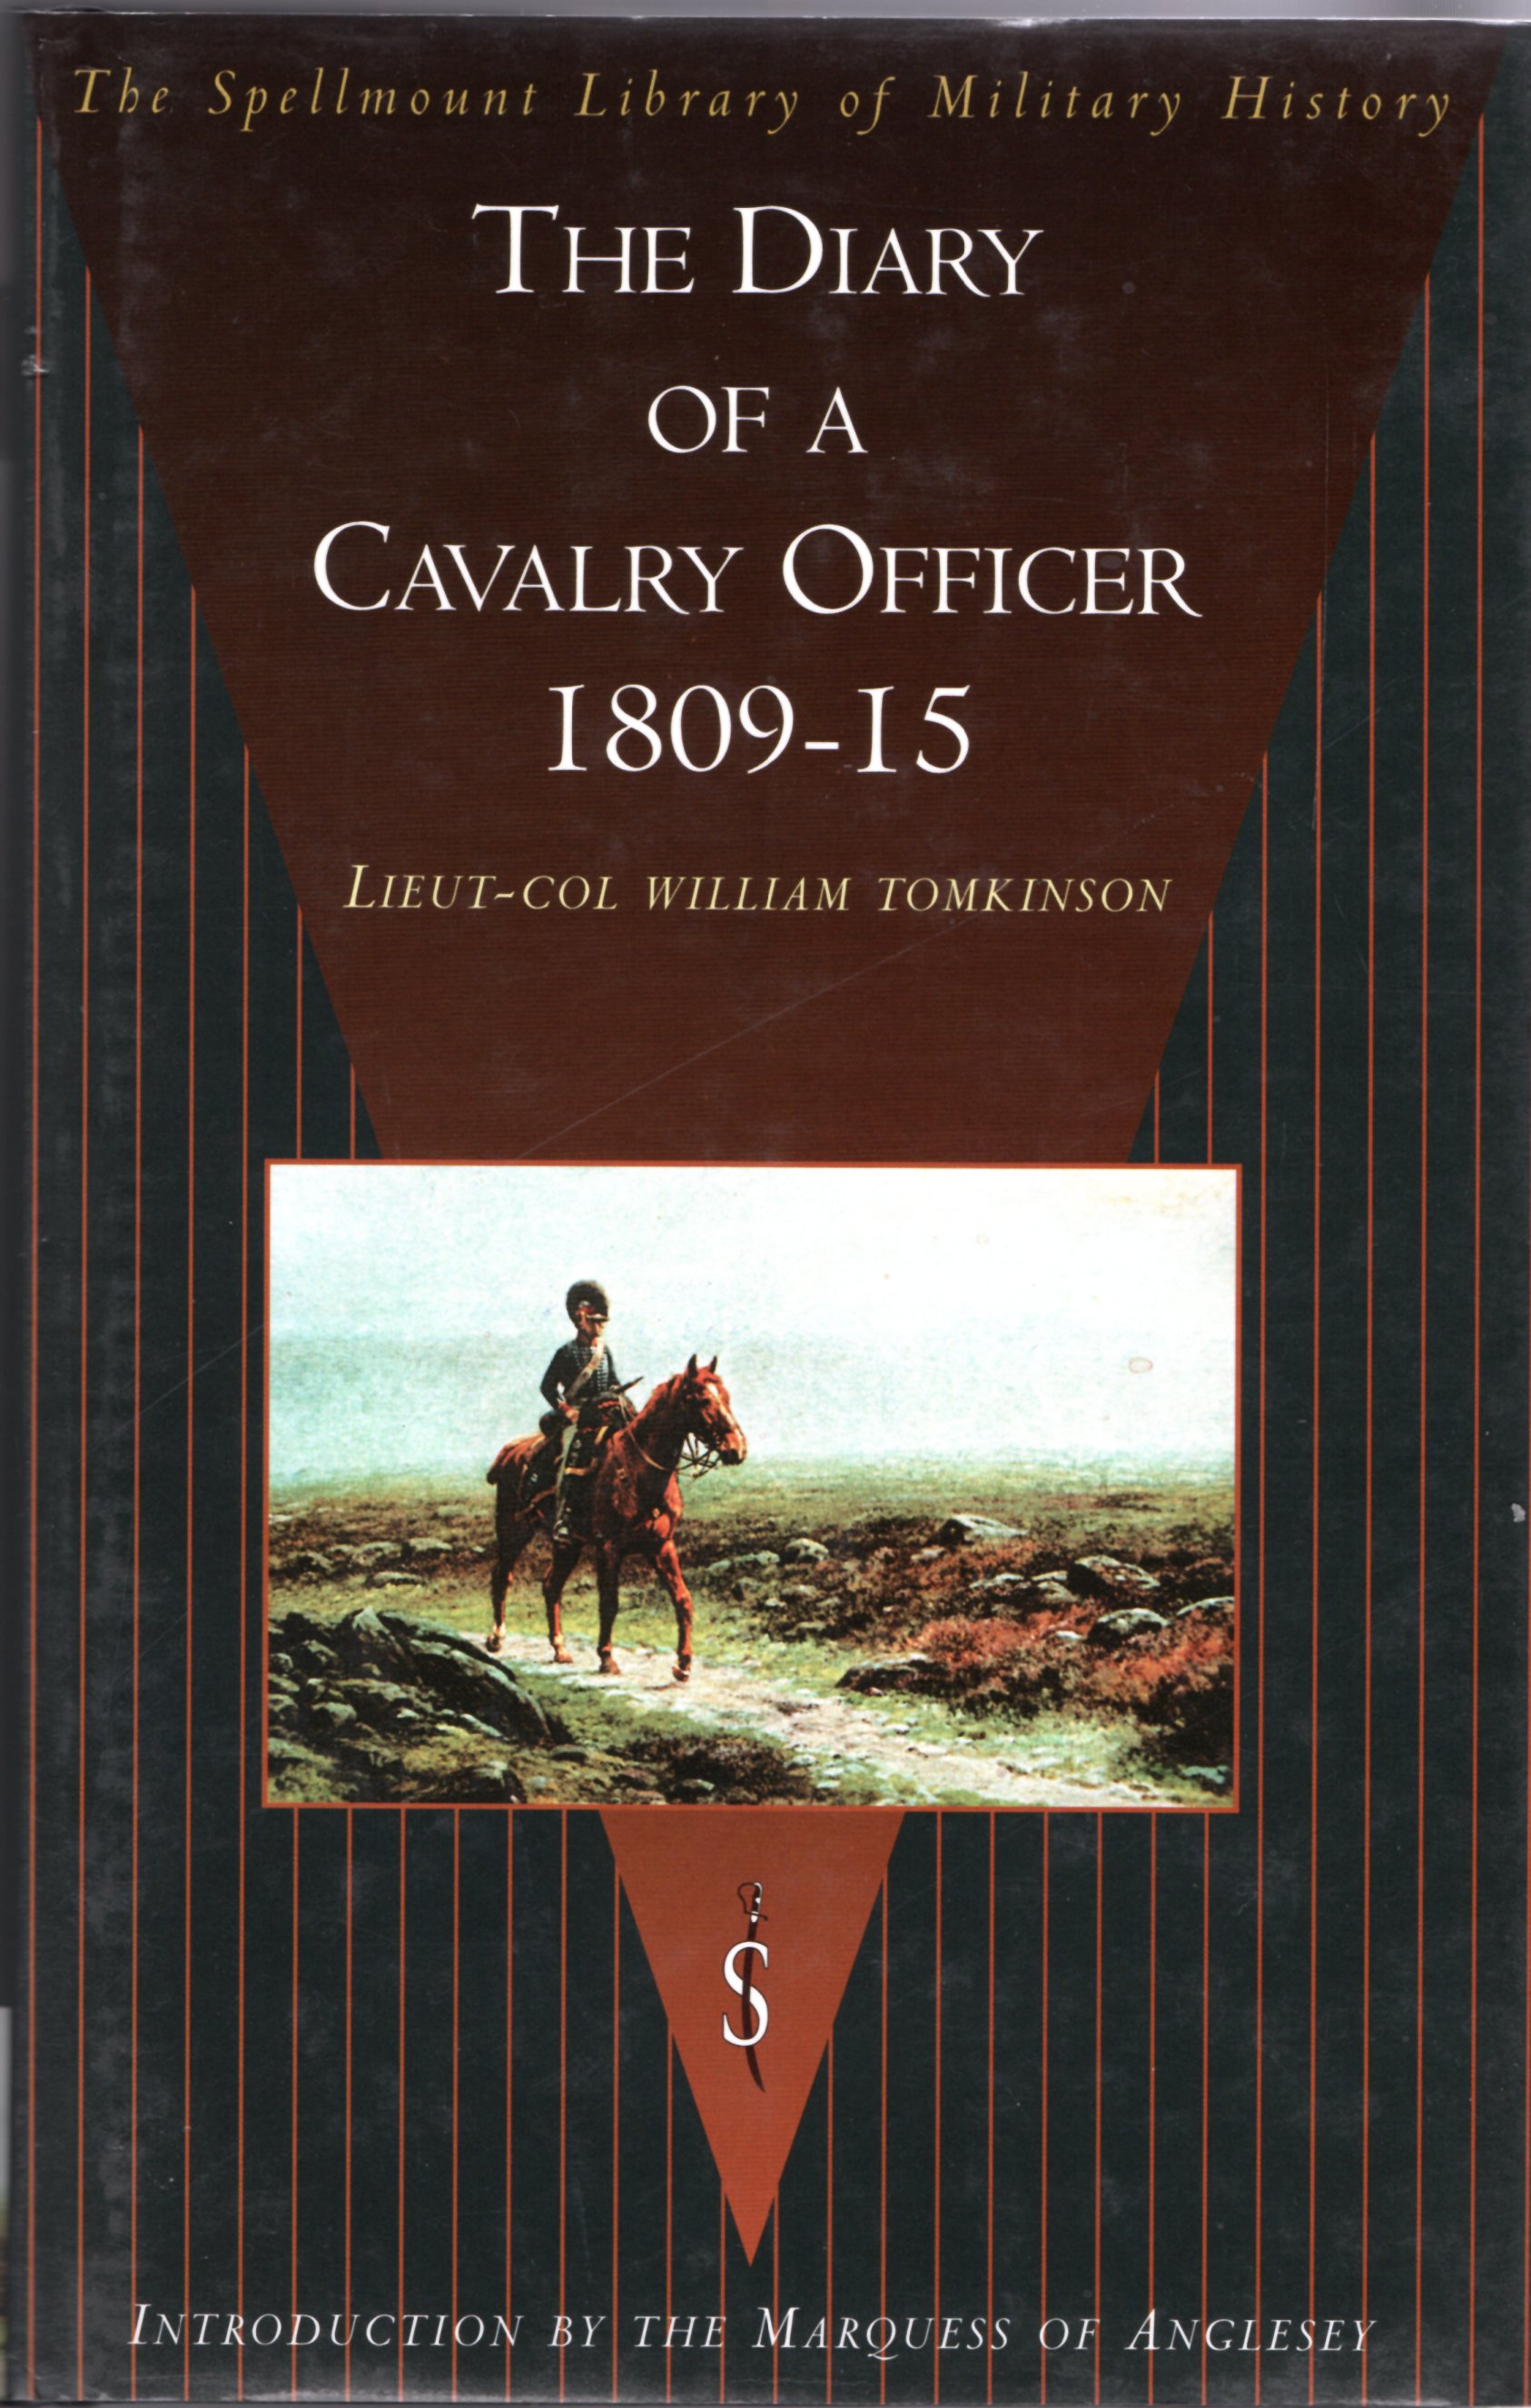 Image for The Diary of a Cavalry Officer, 1809-15 (The Spellmount library of military history)